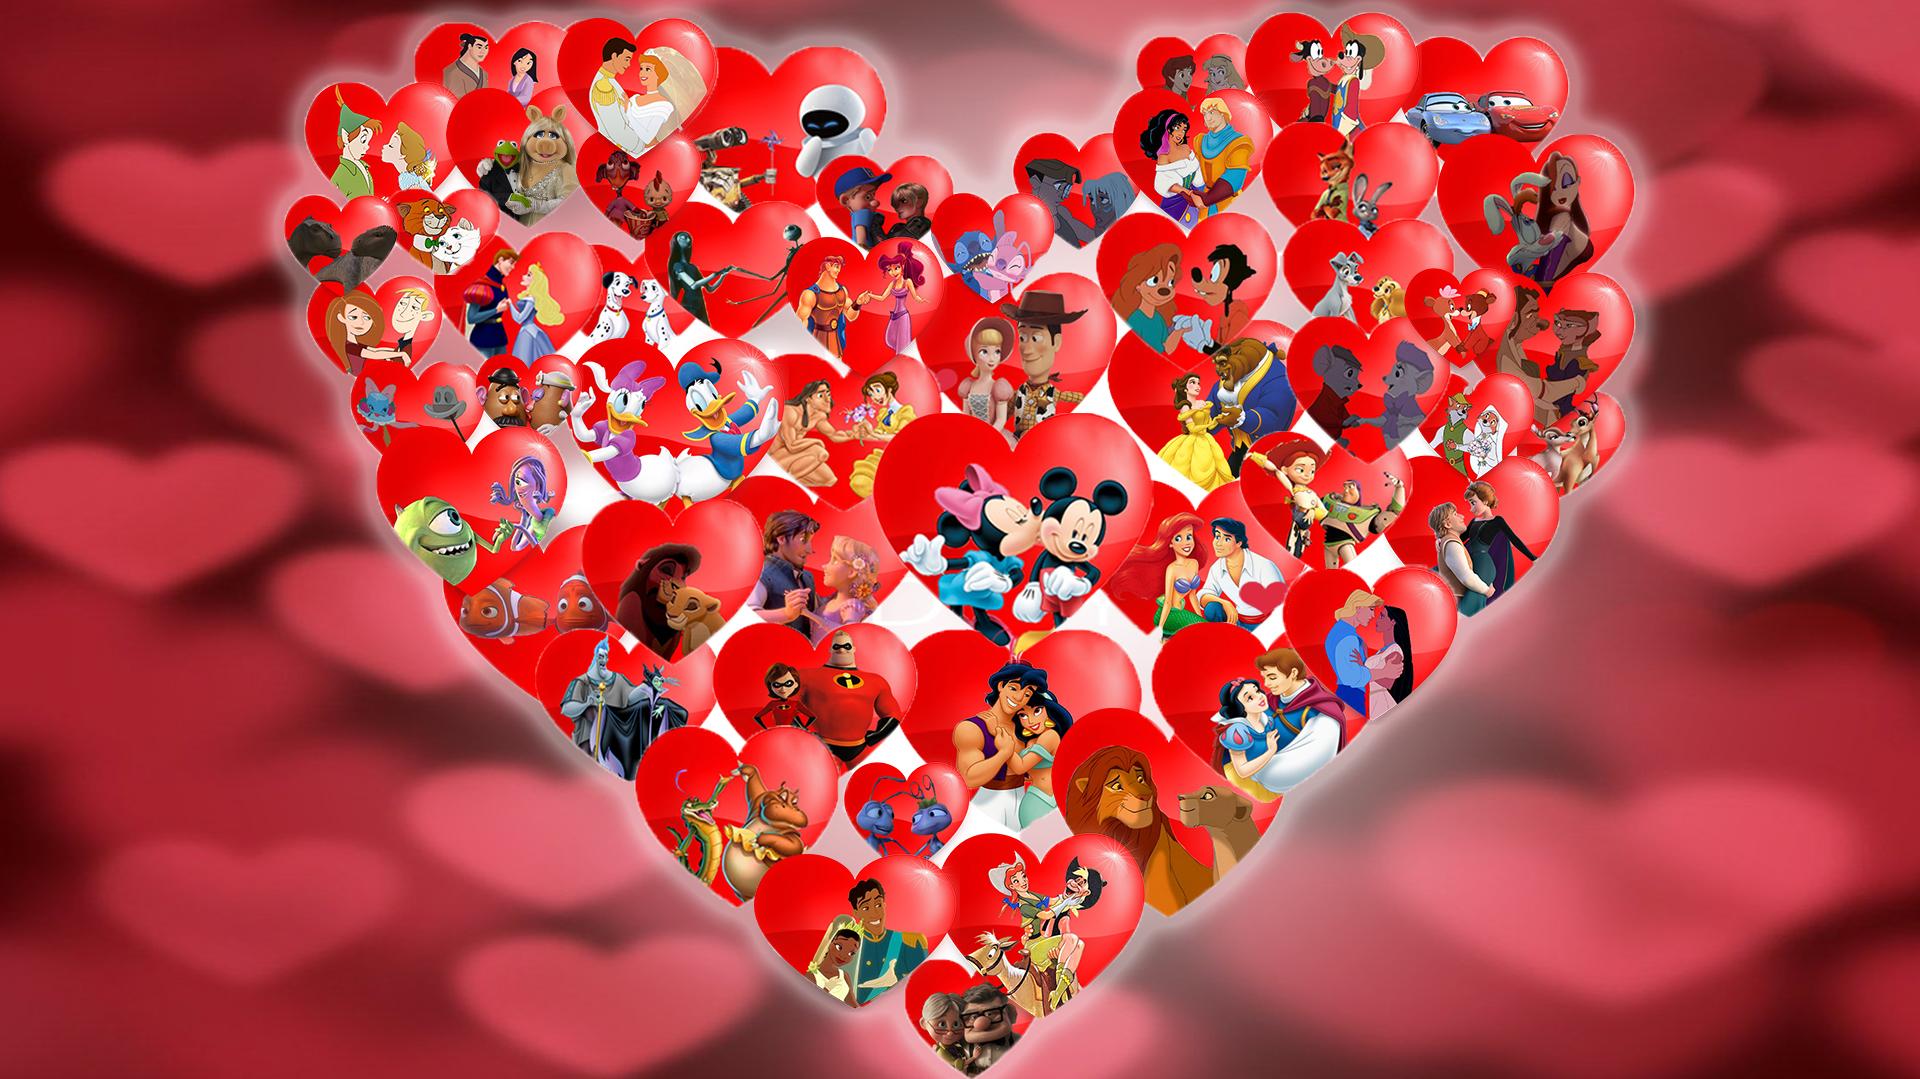 Disney Couples Valentine S Day Wallpaper By Thekingblader995 On